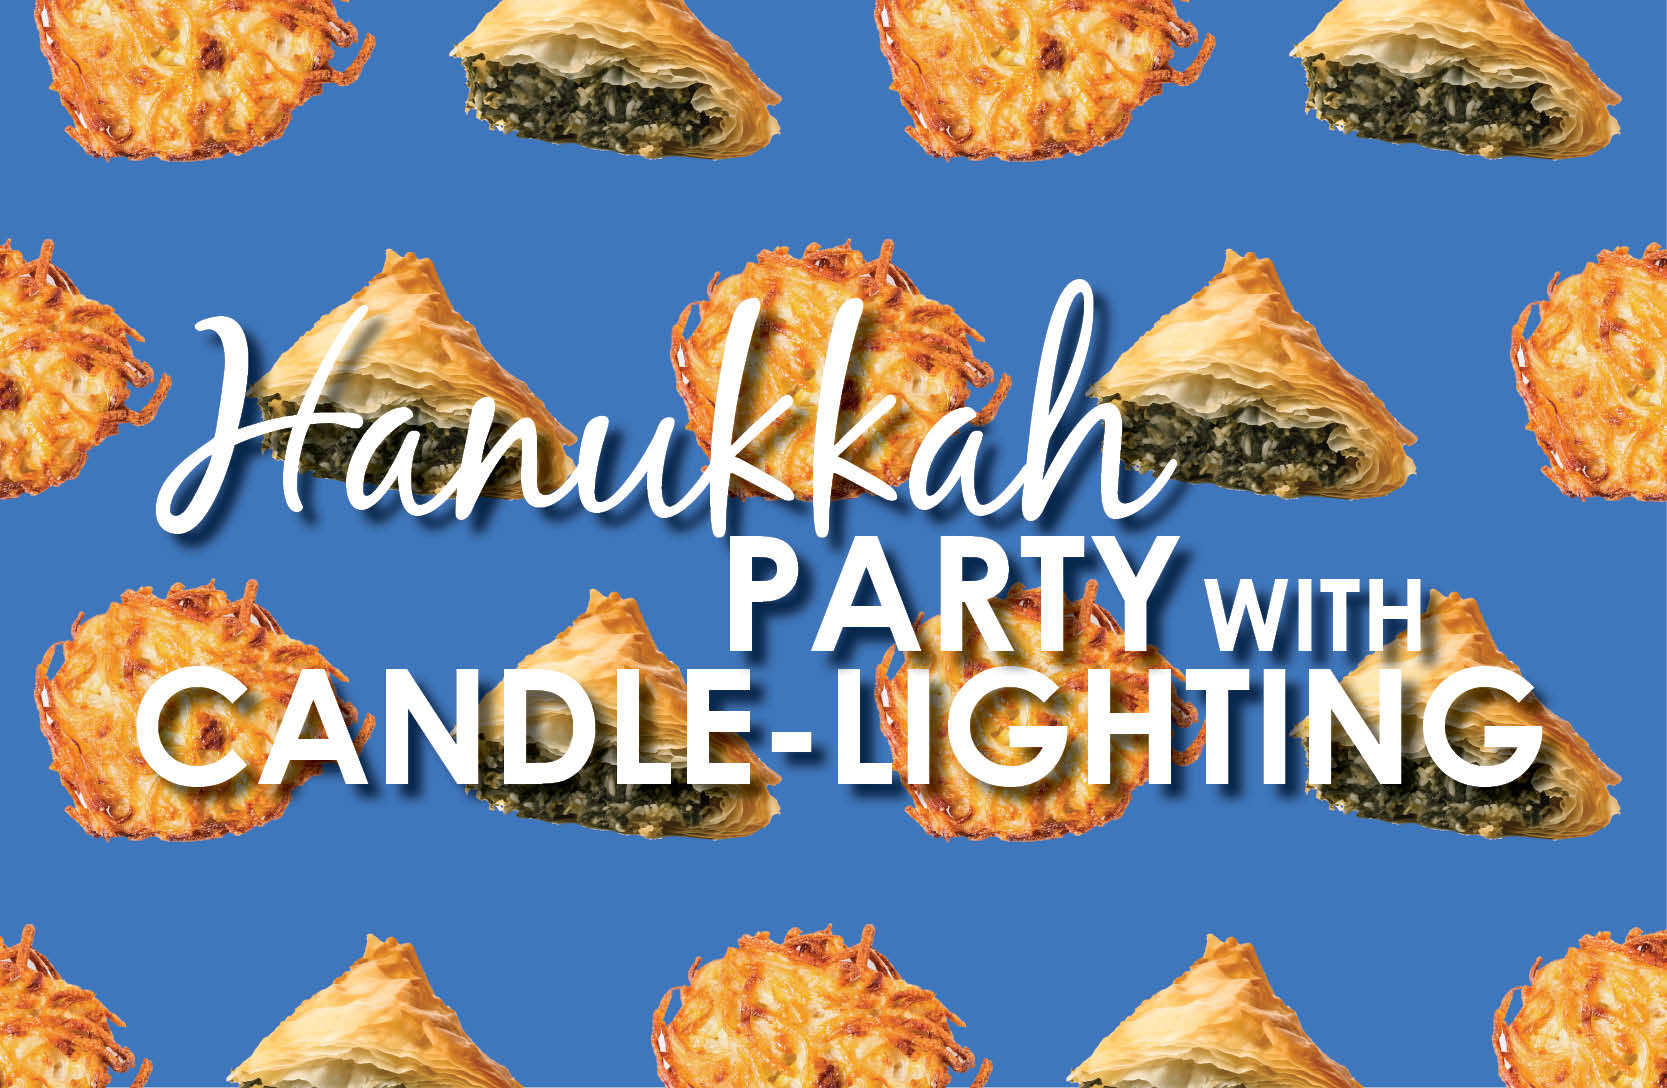 Hanukkah Party with Candle-Lighting